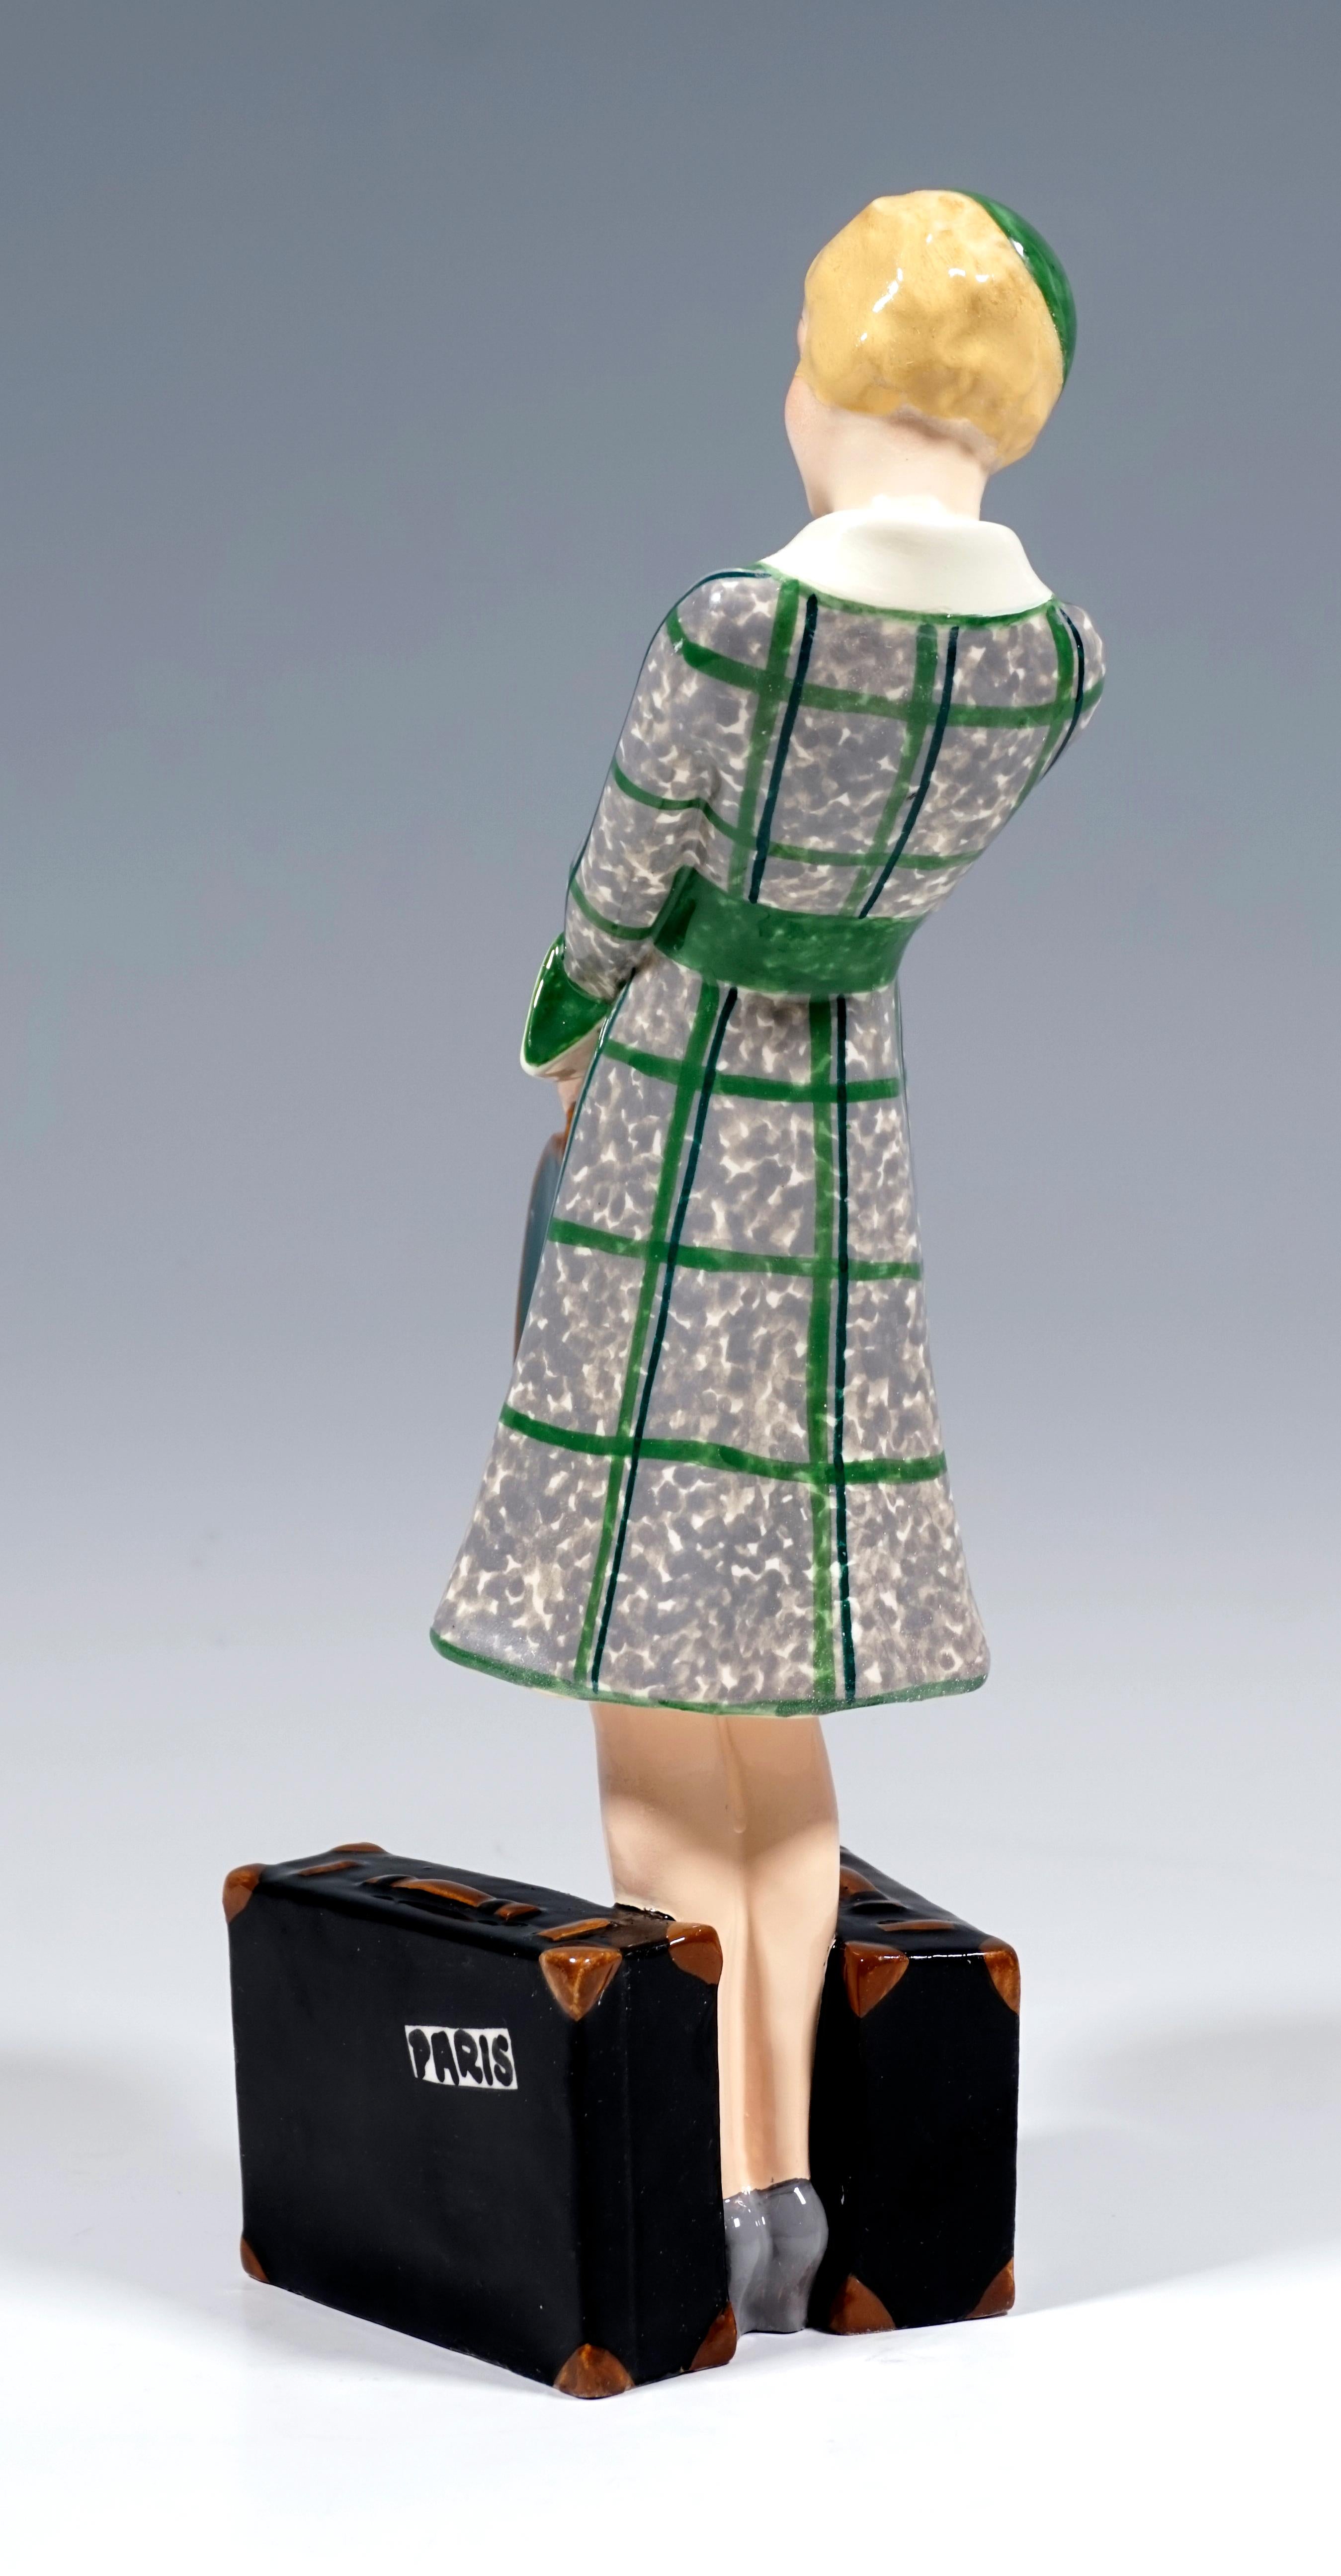 Very rare Goldscheider Vienna ceramic figurine of the 1930s:
Depiction of a blond, elegant lady in a gray-green dress and a matching hat standing between two black suitcases, holding a green bandbox in front of her with both hands.
The figure is